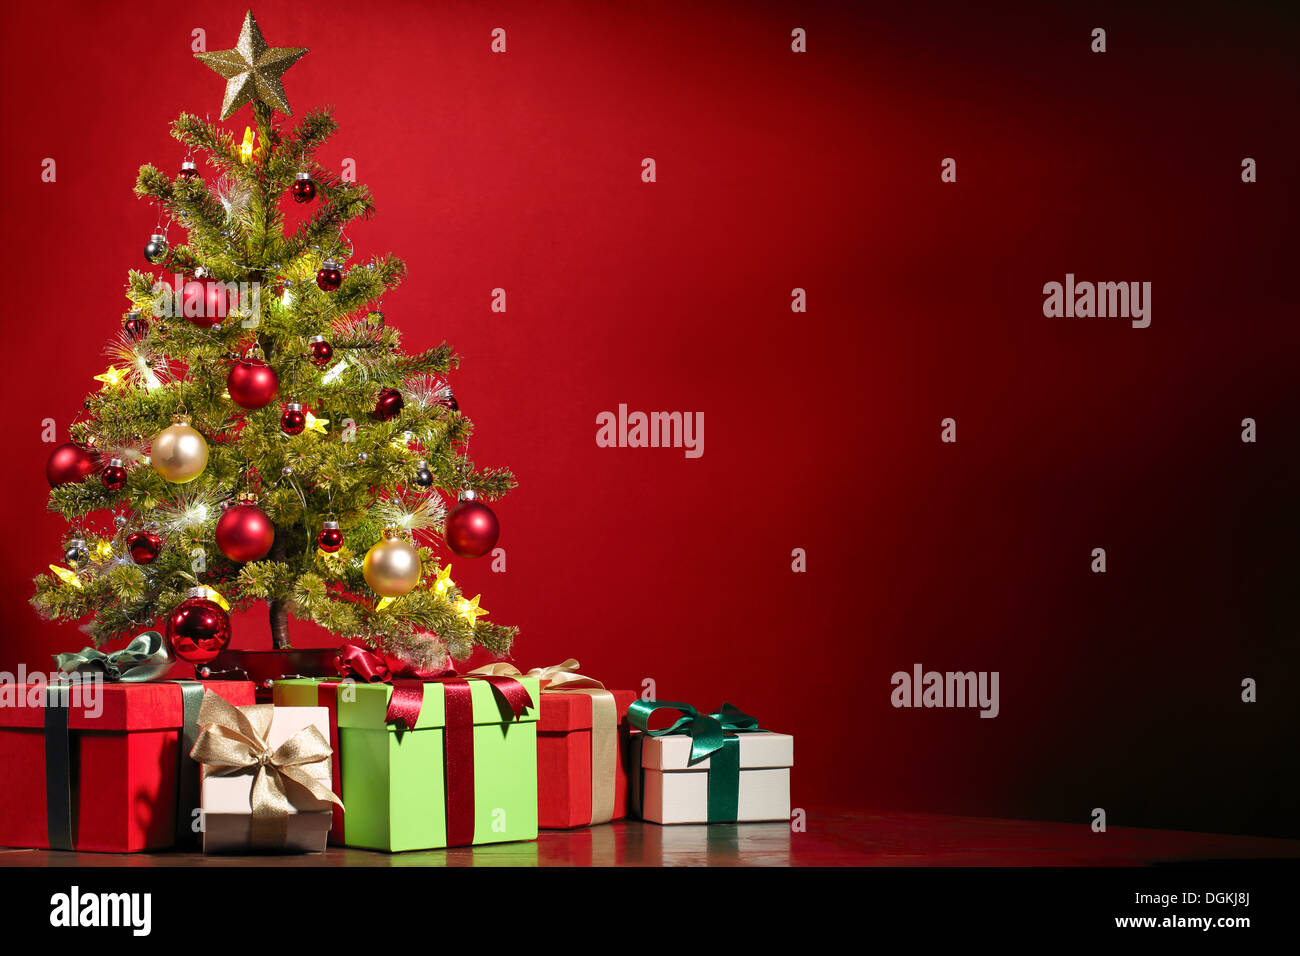 Christmas tree with gifts on red background. Stock Photo